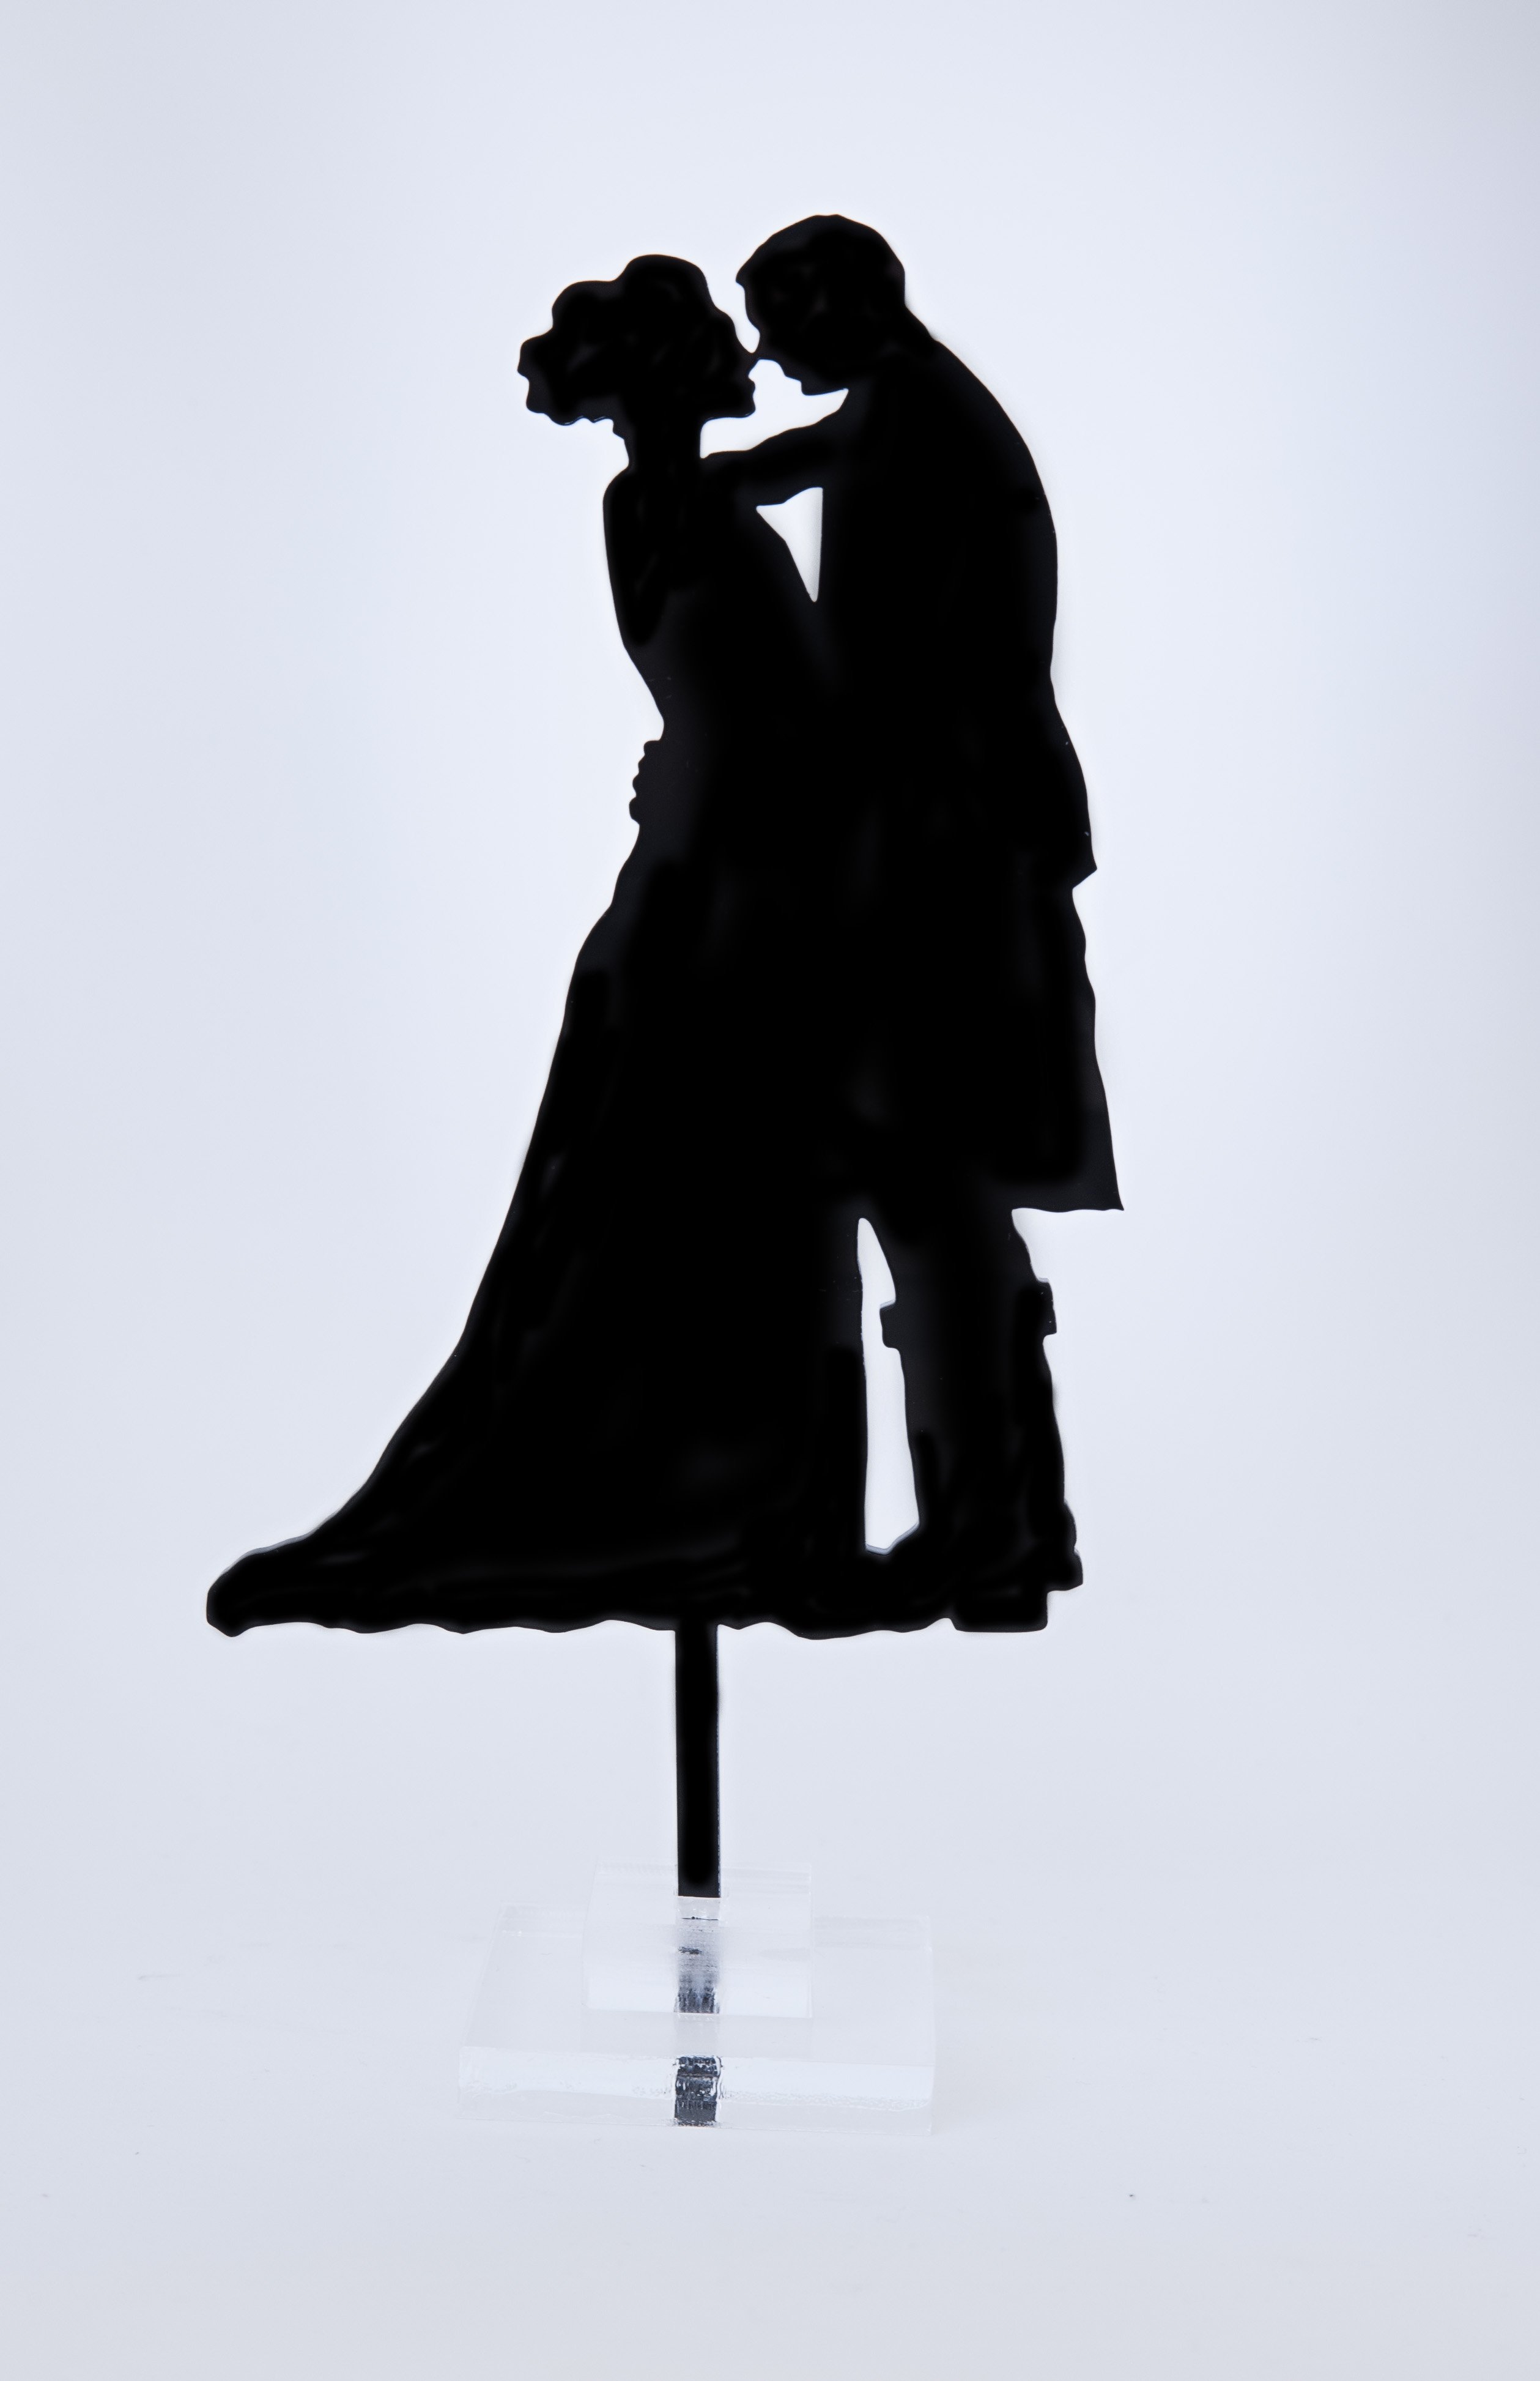 Download Bride And Groom Silhouette Vector at Vectorified.com ...